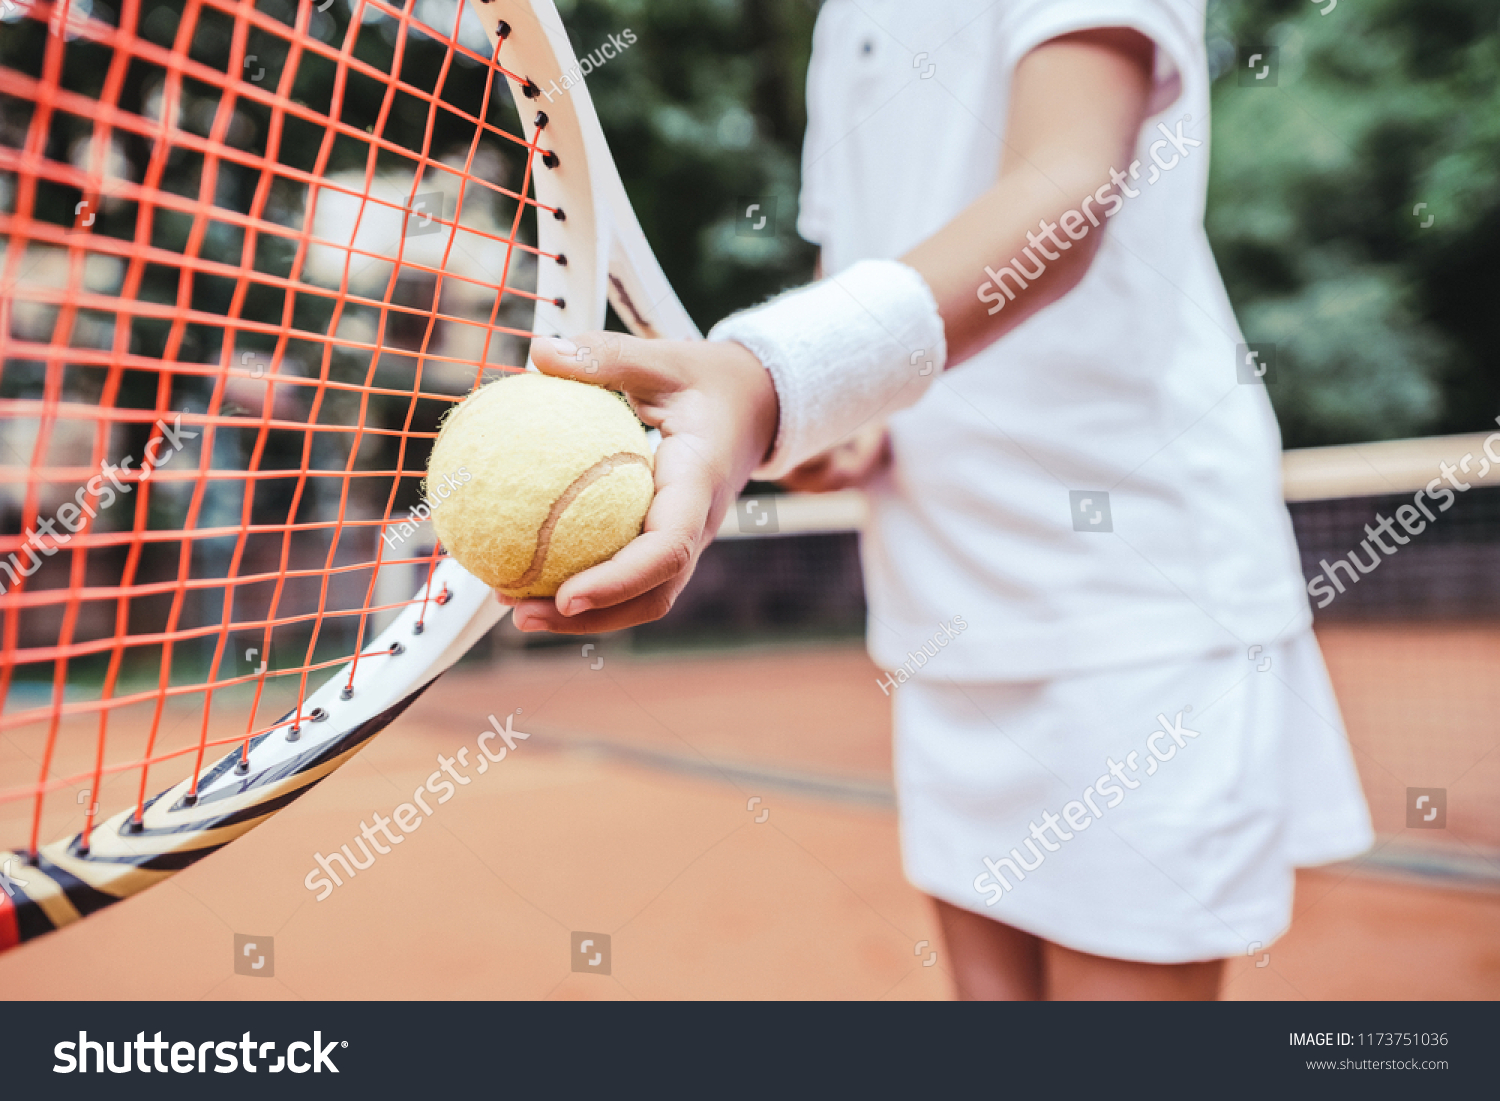 Sporty little girl preparing to serve tennis ball. Close up view of beautiful yong girl holding tennis ball and racket. Child tennis player preparing to serve. #1173751036